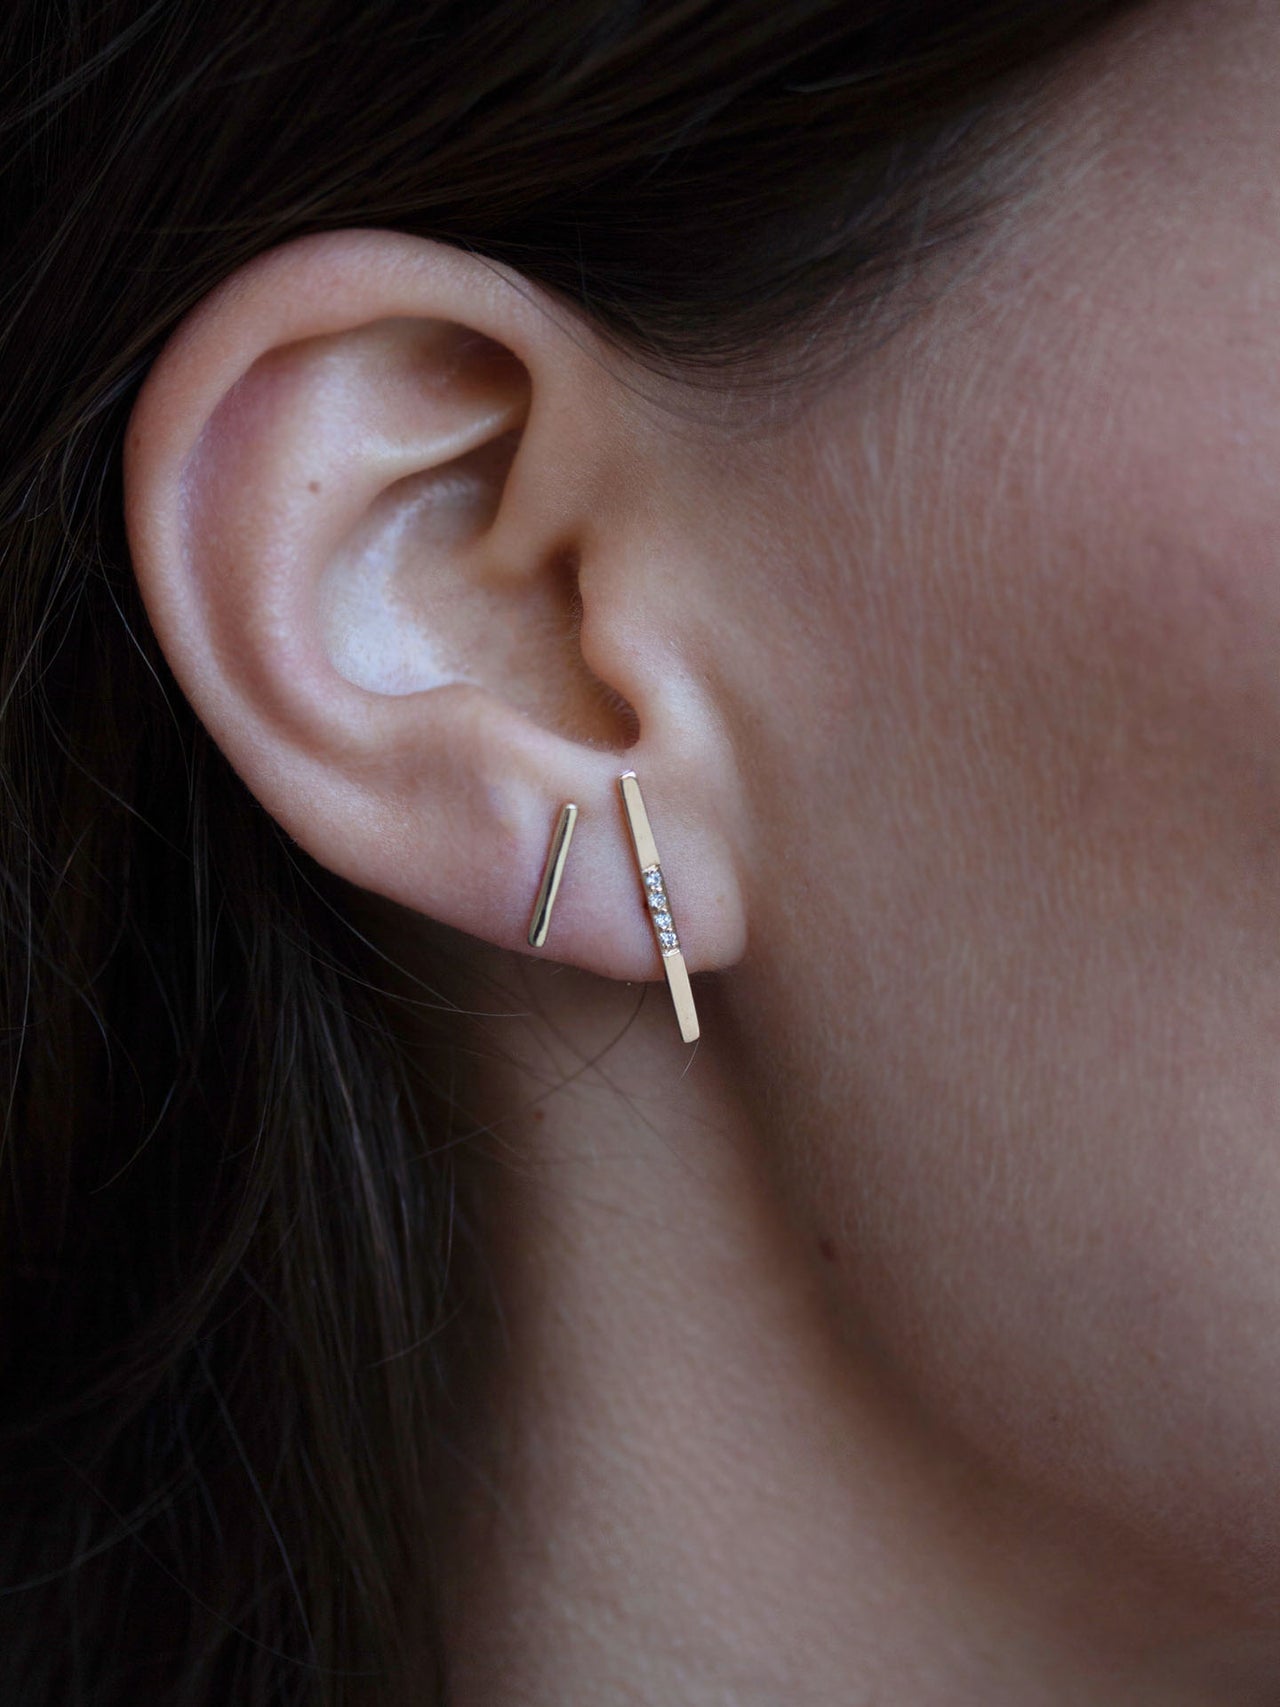 14kt Yellow Gold Diamond Rod Stud Earring pictured on model.